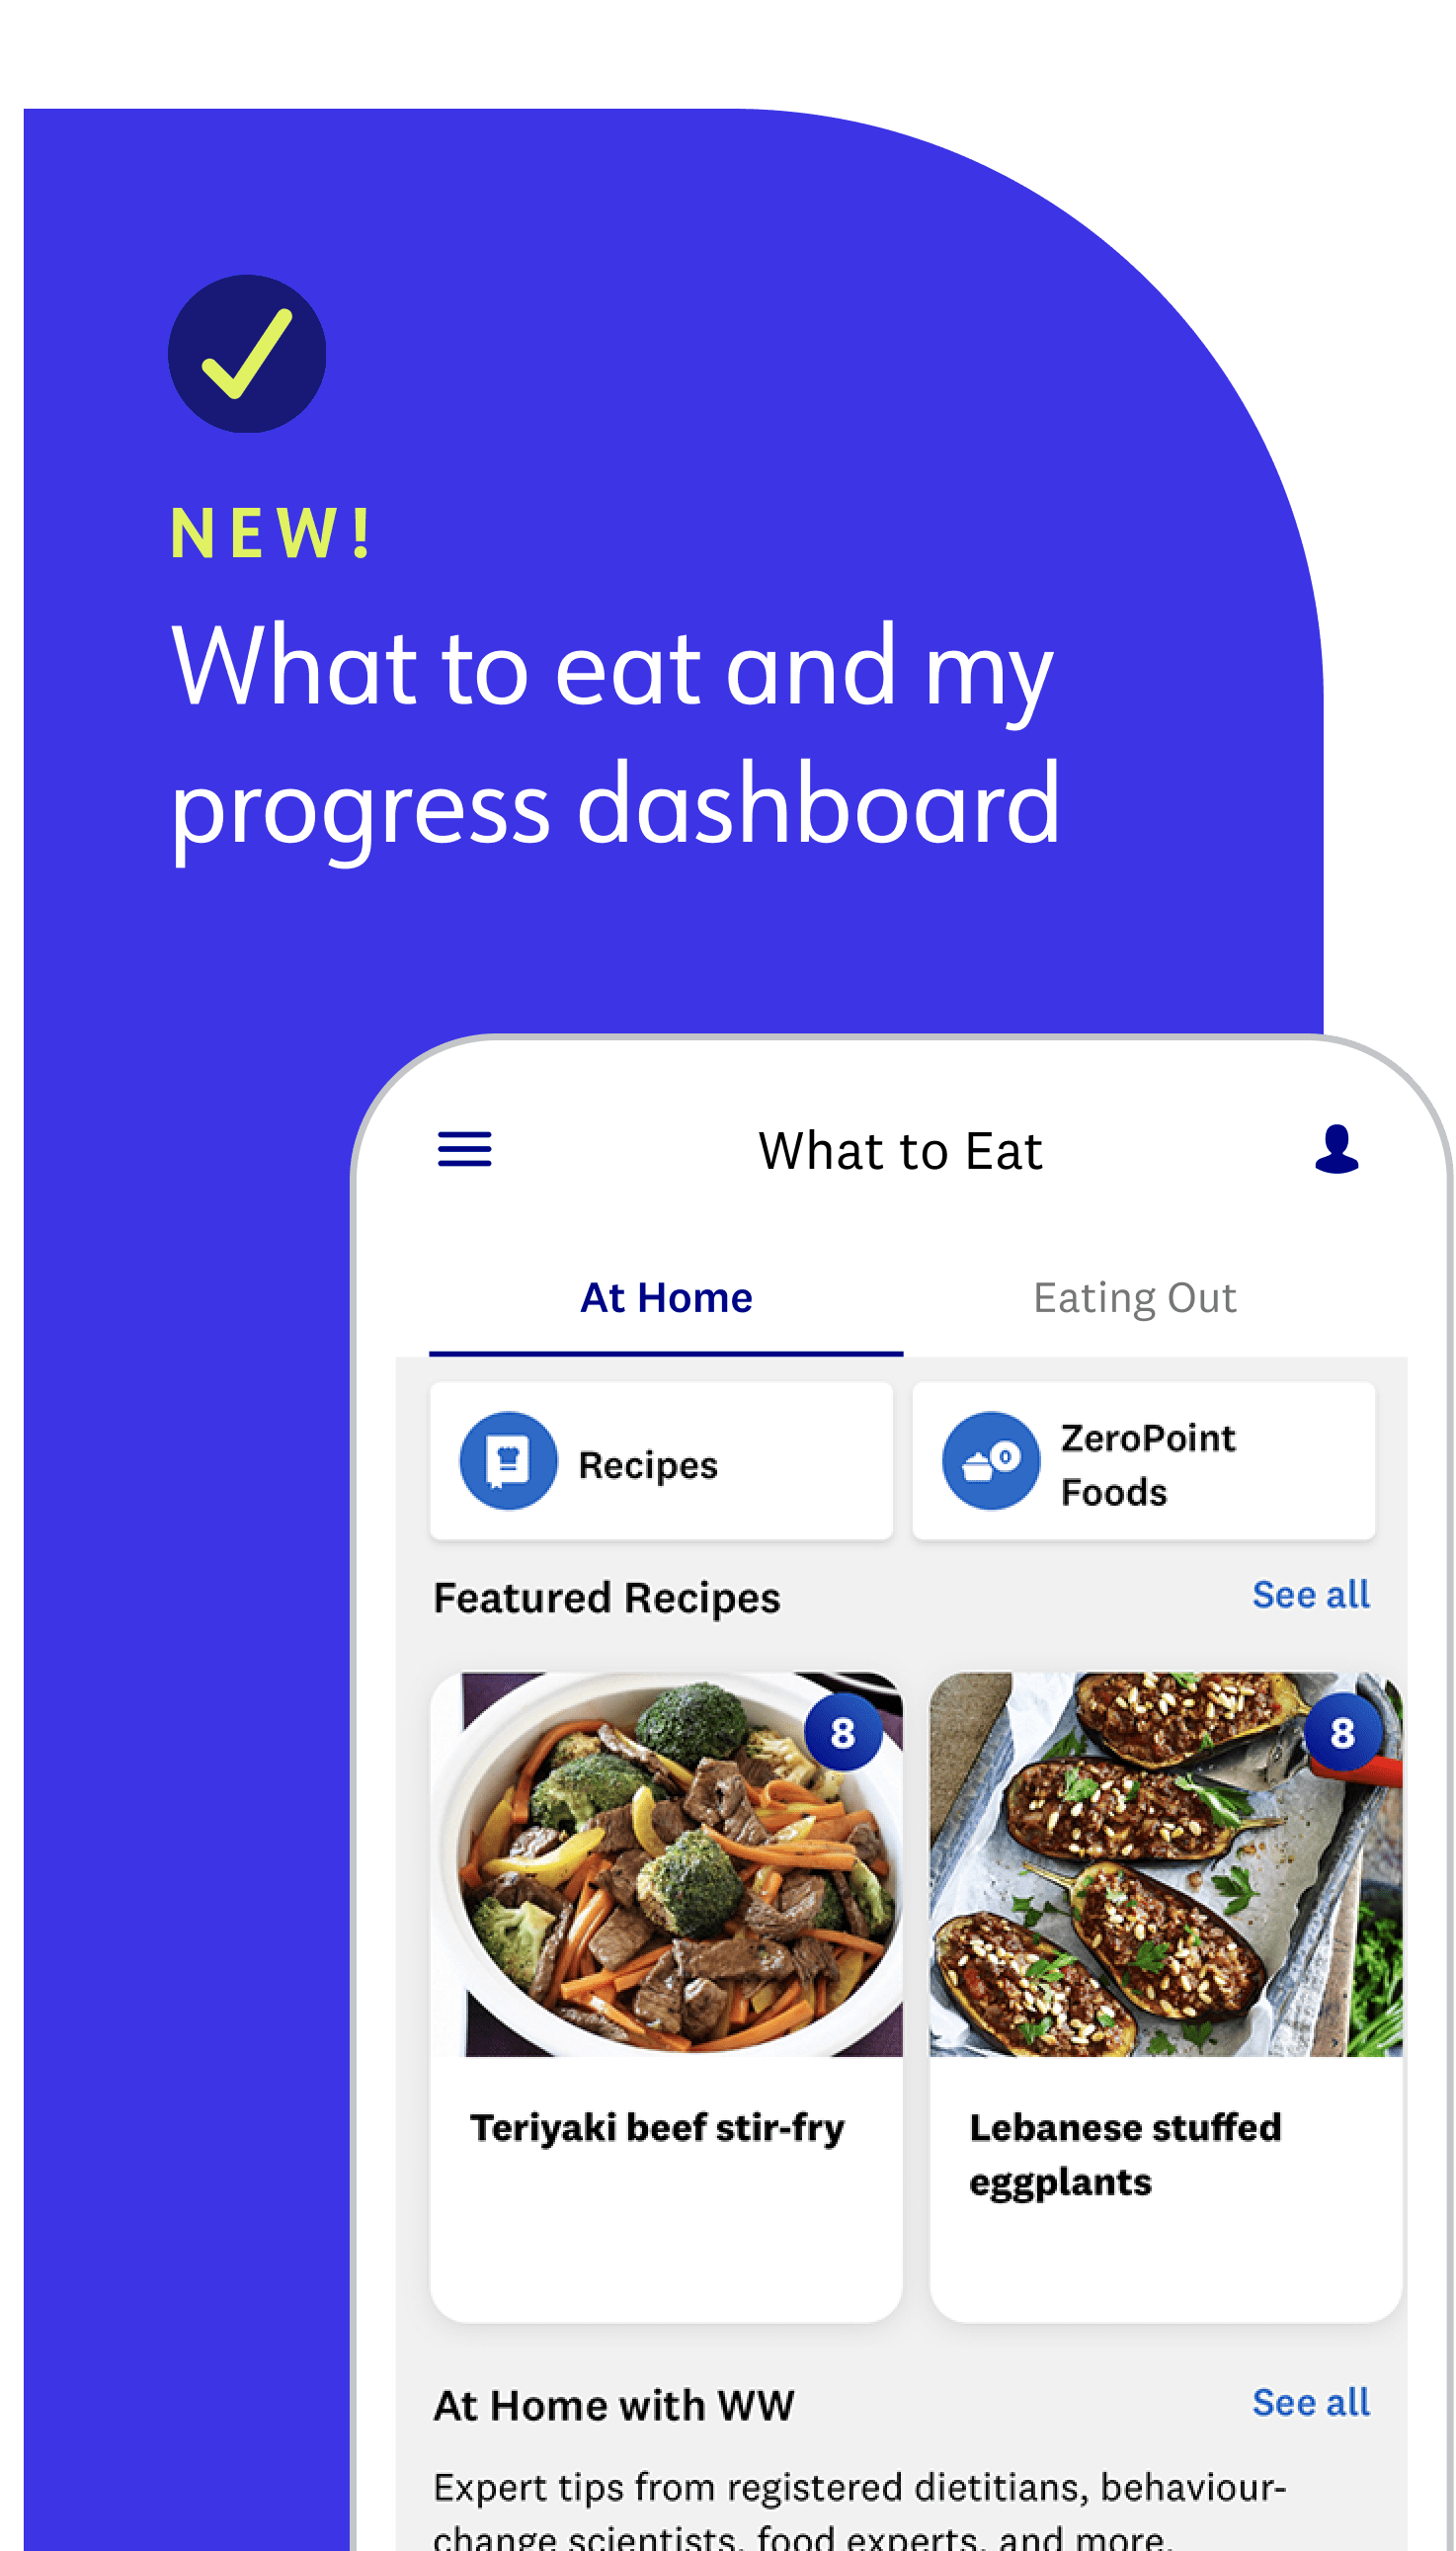 new! what to eat and my progress dashboard